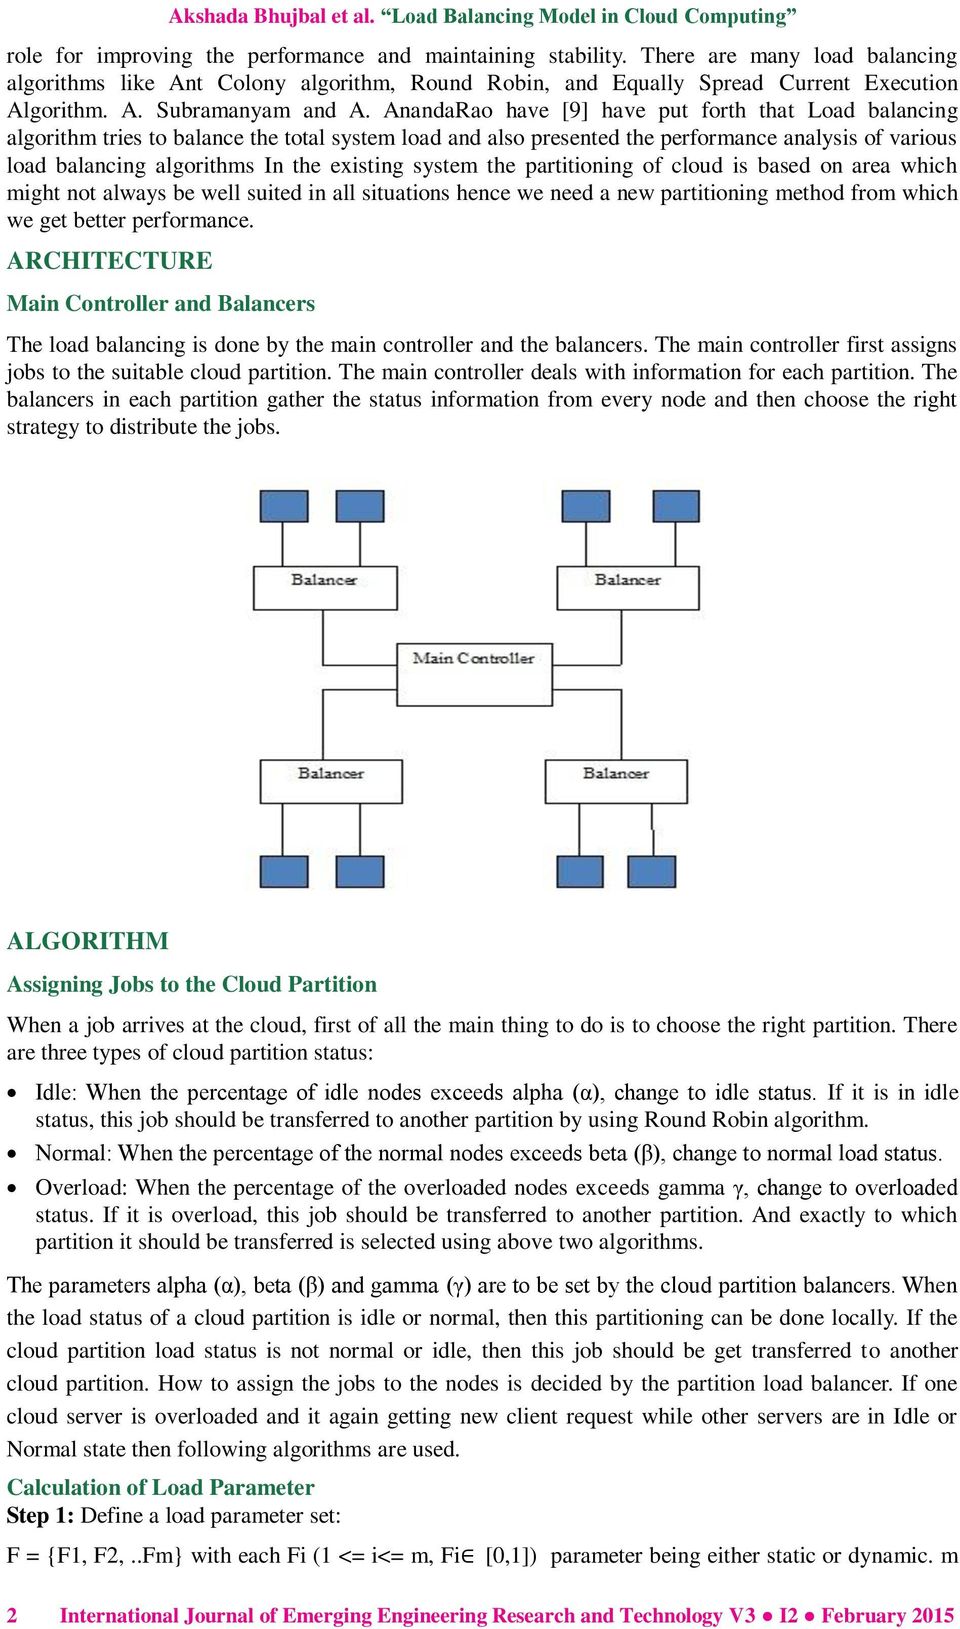 AnandaRao have [9] have put forth that Load balancing algorithm tries to balance the total system load and also presented the performance analysis of various load balancing algorithms In the existing